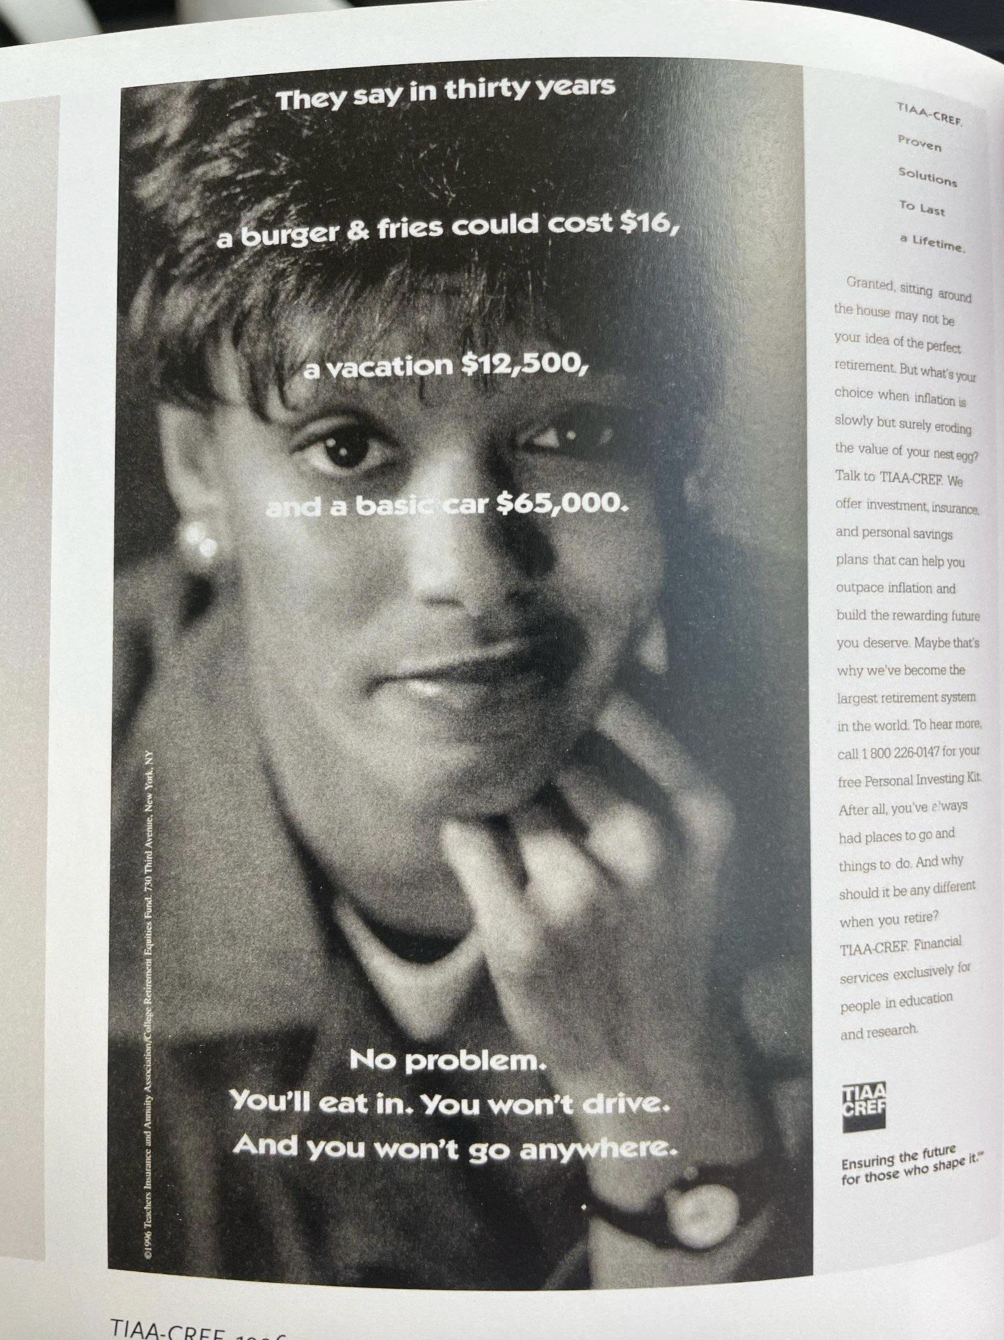 tiaa cref 1996 ad - TiaaCree They say in thirty years a burger & fries could cost $16, vacation $12,500, and a basic car $65,000. No problem. You'll eat in. You won't drive. And you won't go anywhere. Tiaa Cre